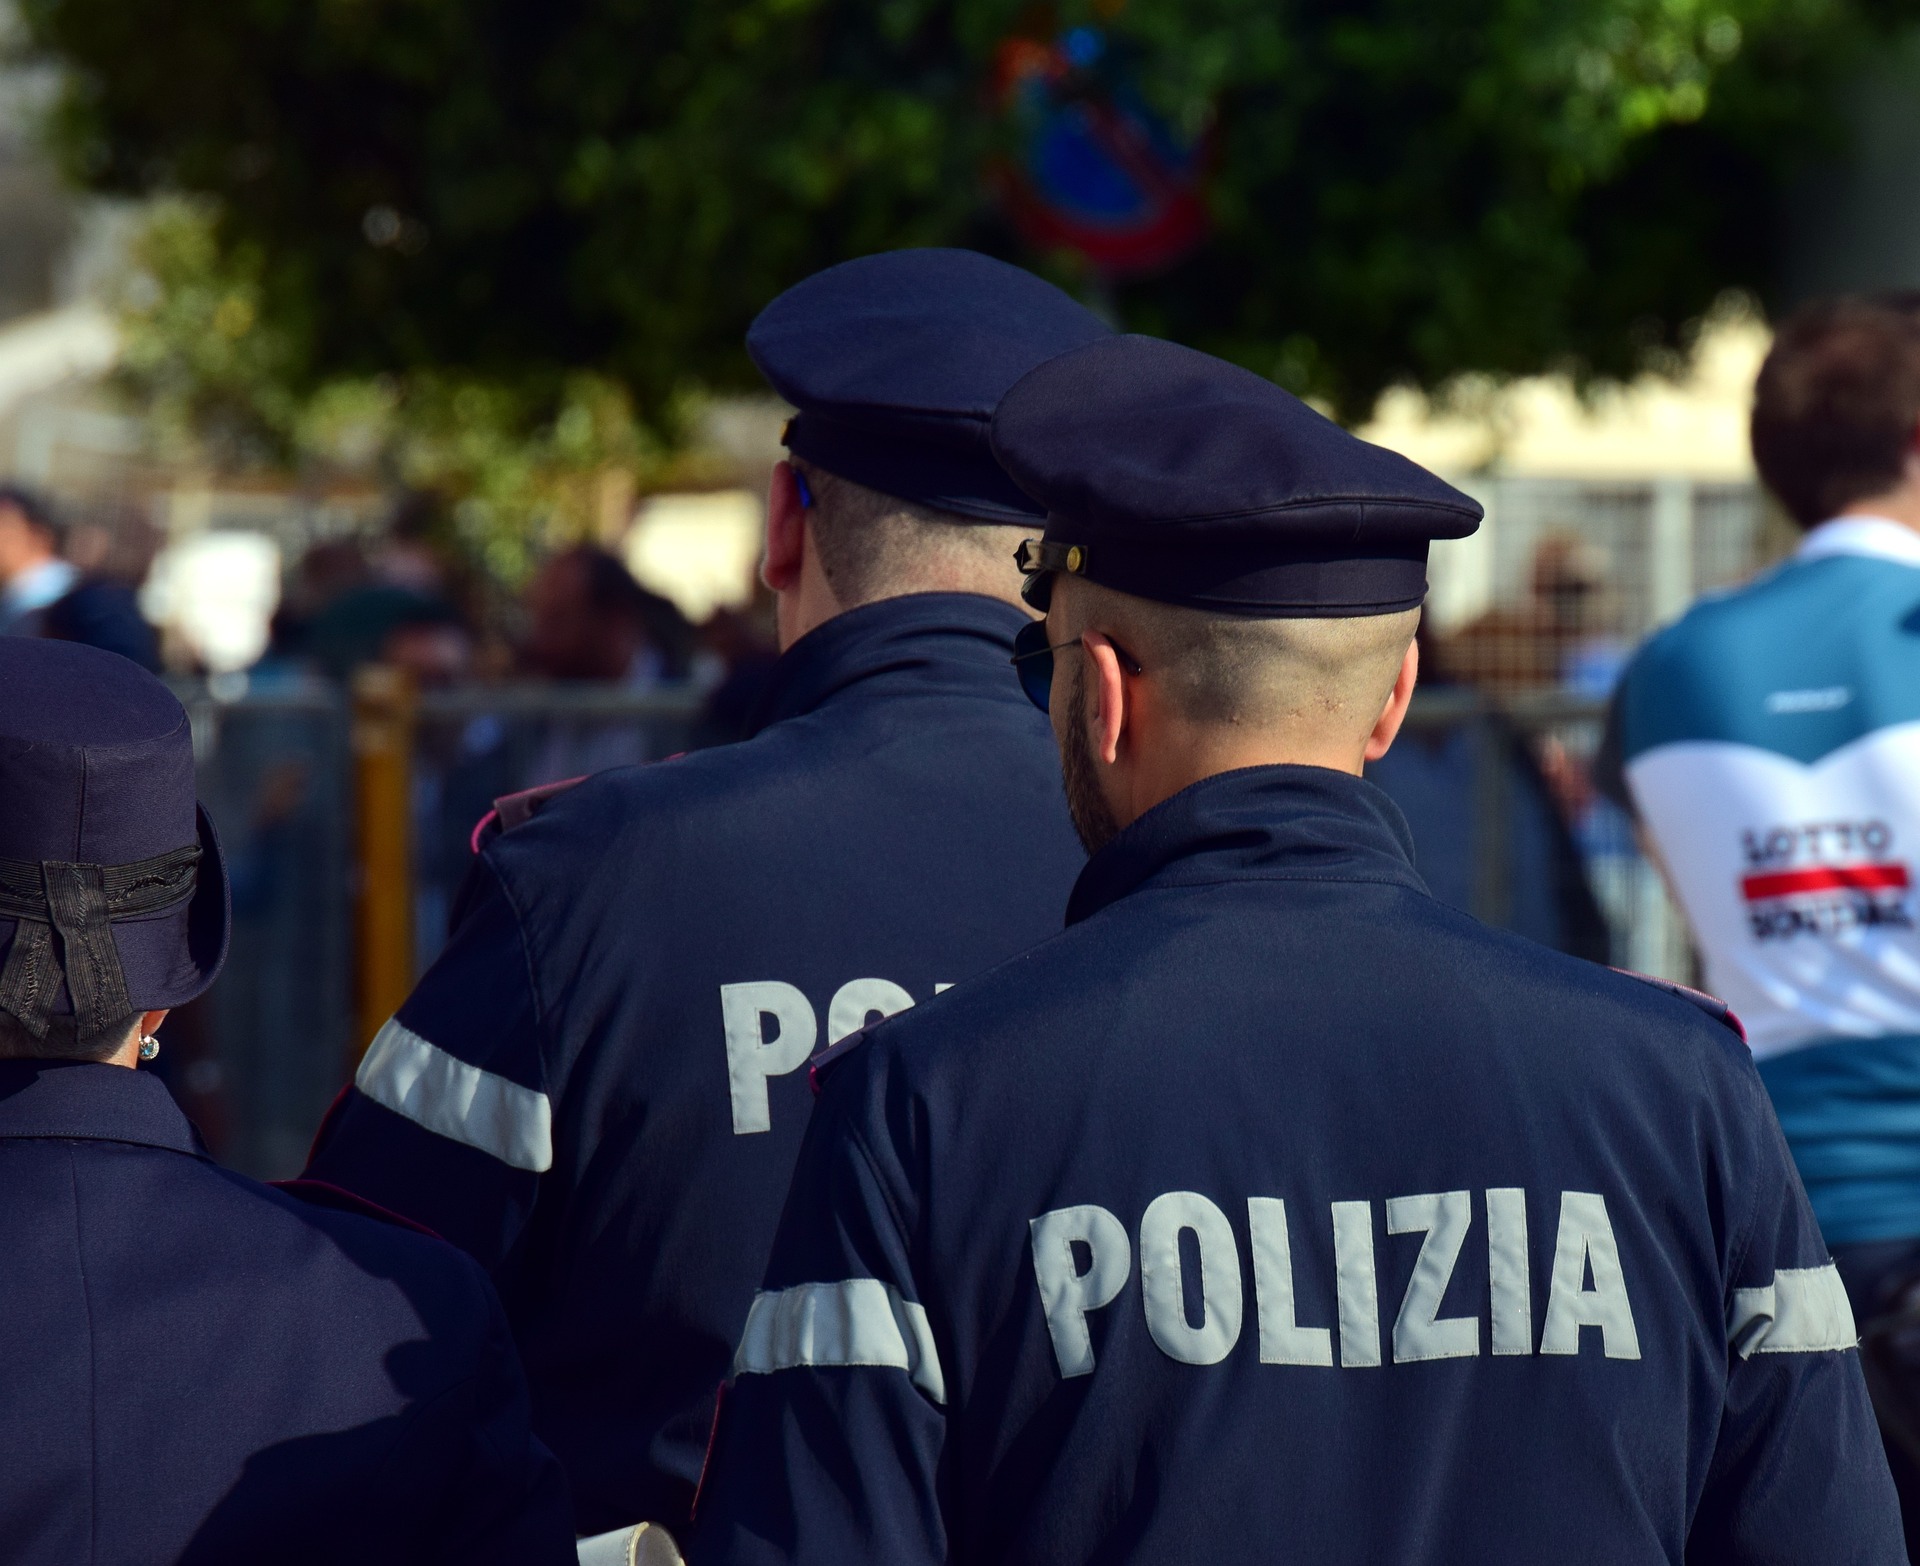 Food, Car Companies Used by ‘Ndrangheta Targeted in Raids Across Italy, Belgium and Germany